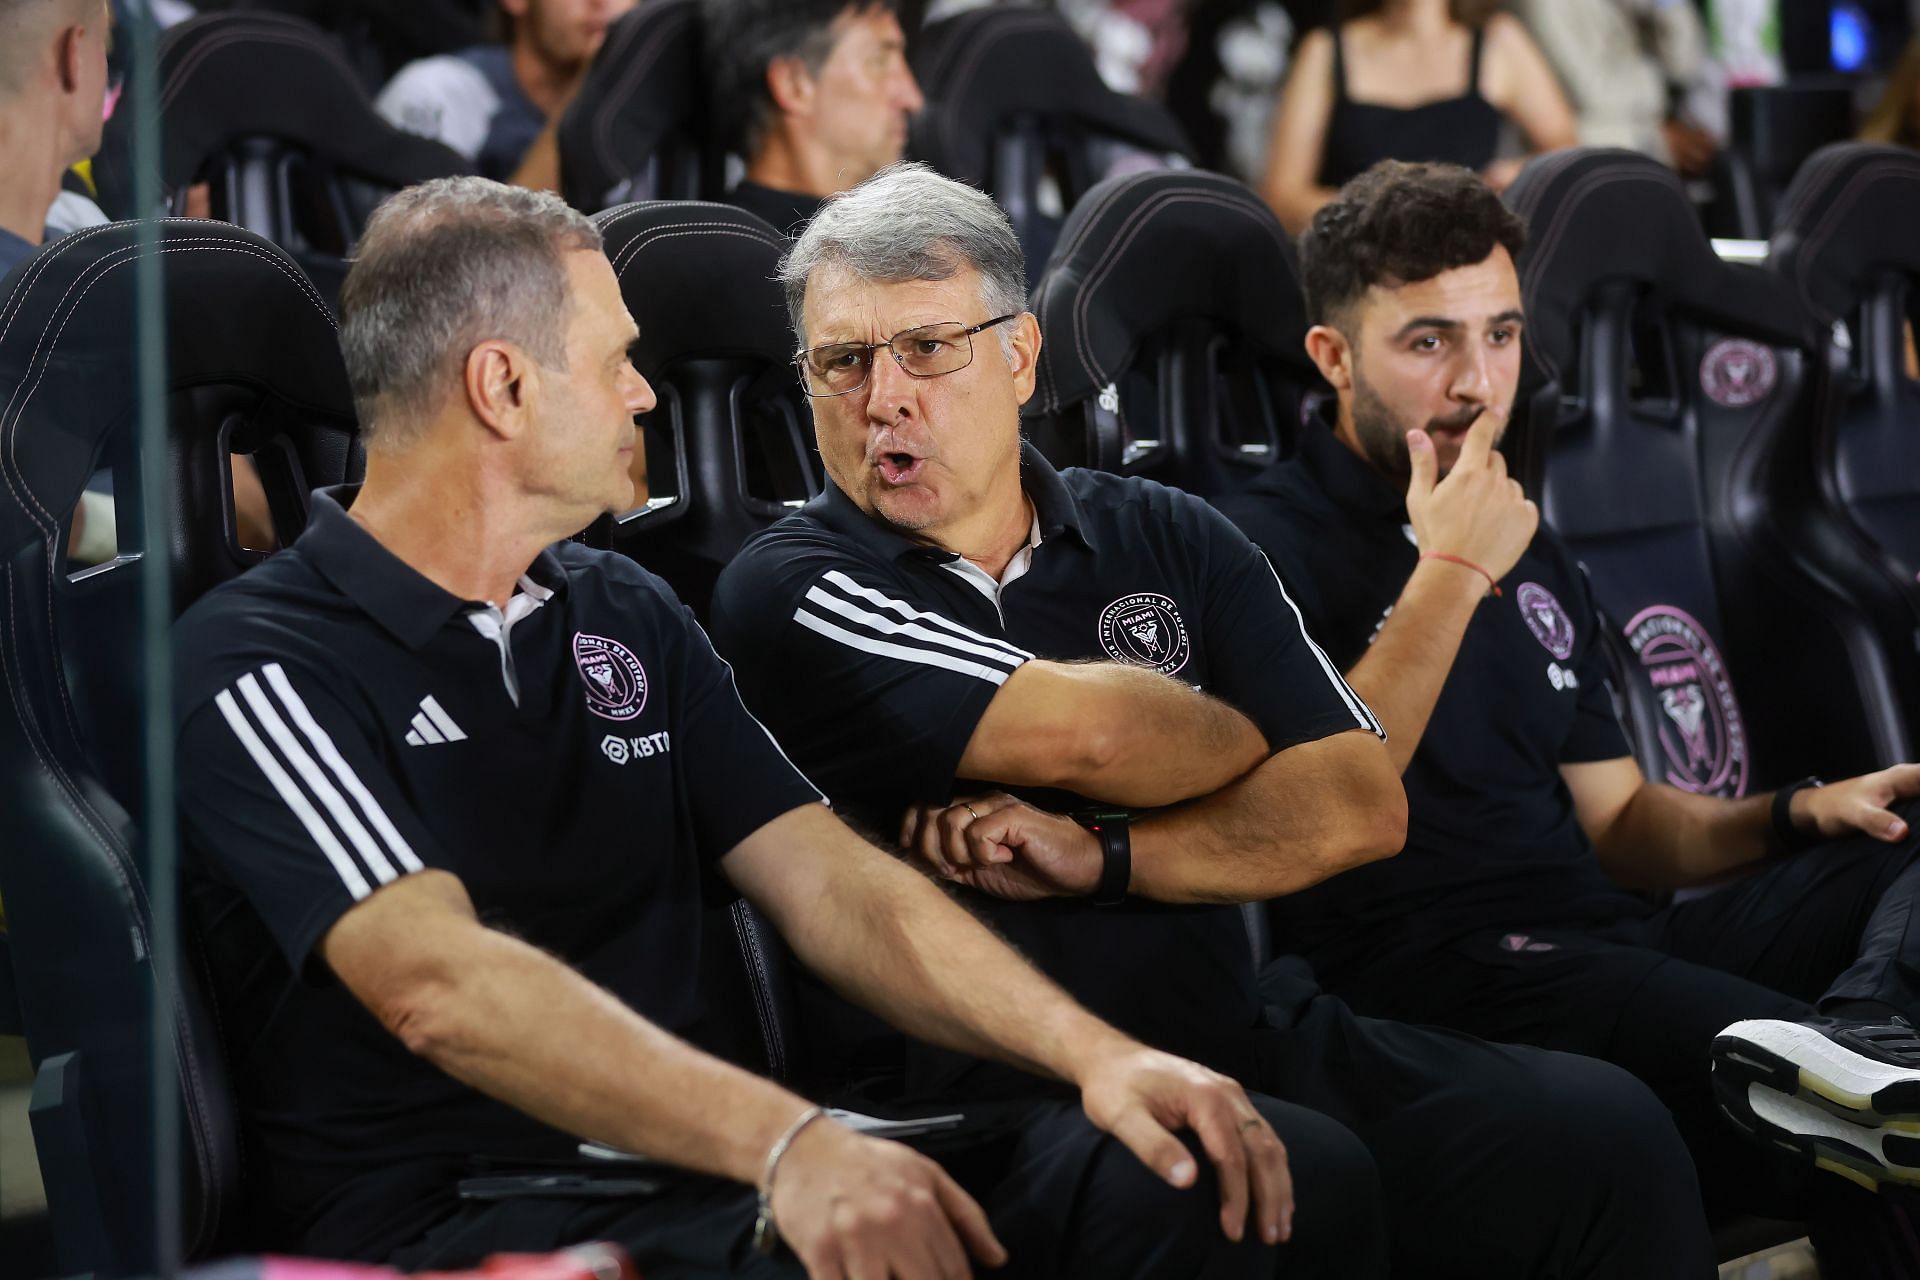 Gerardo Martino (middle) quashed suggestions Lionel Messi might be injured.